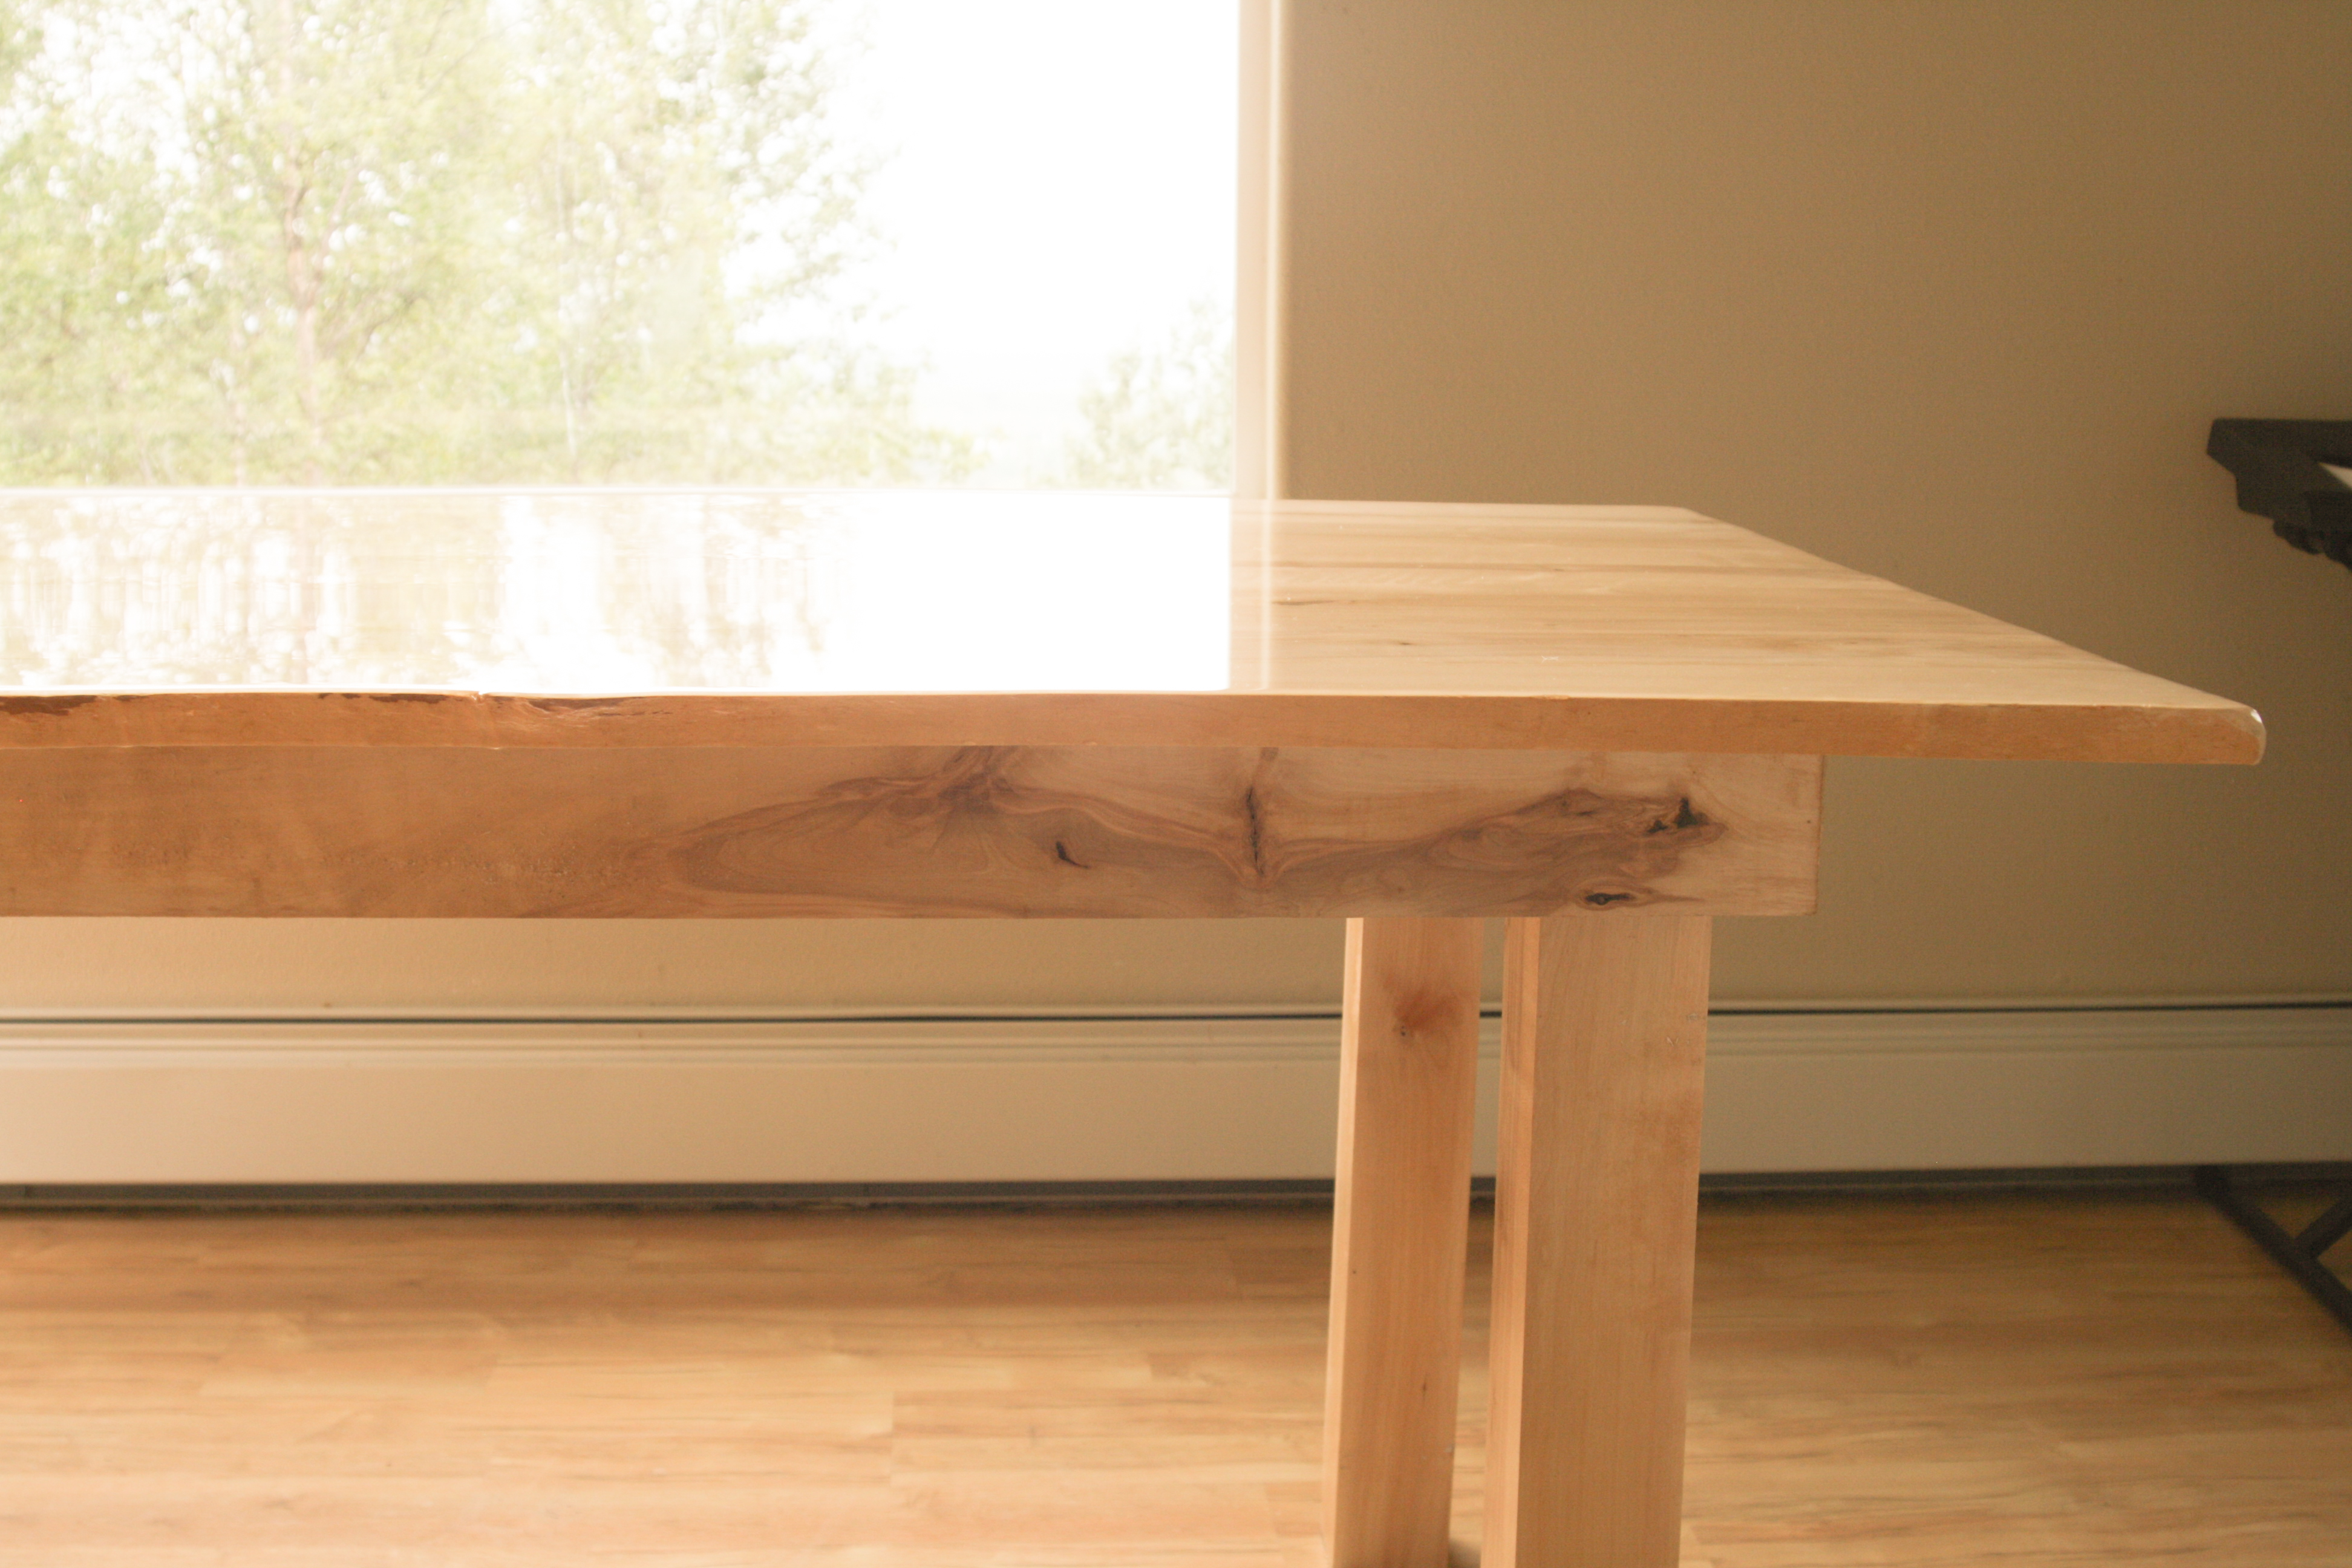 The Birch Table.